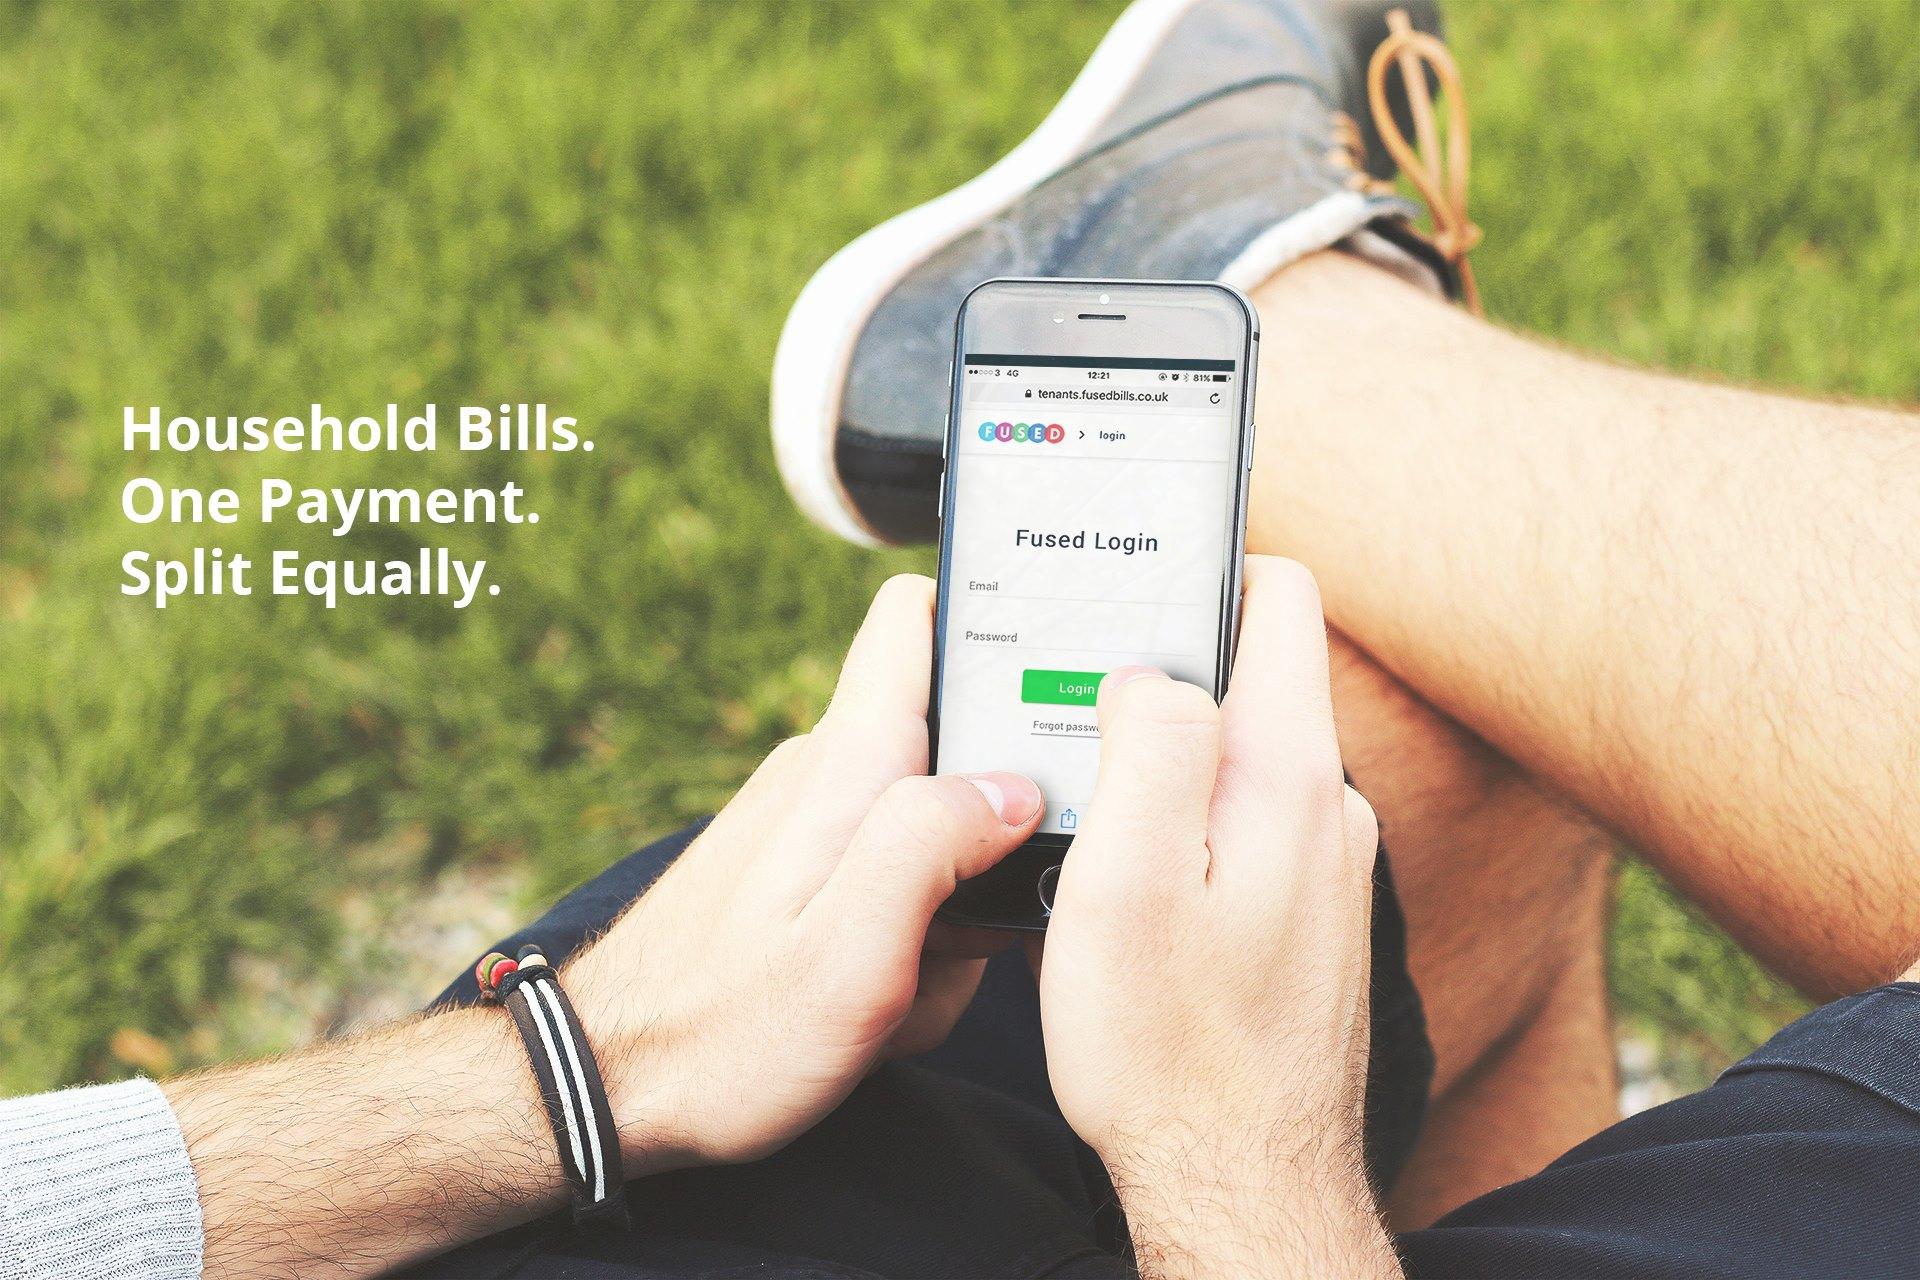 £50 Free Credit - Exclusive Deal with Fused Bills